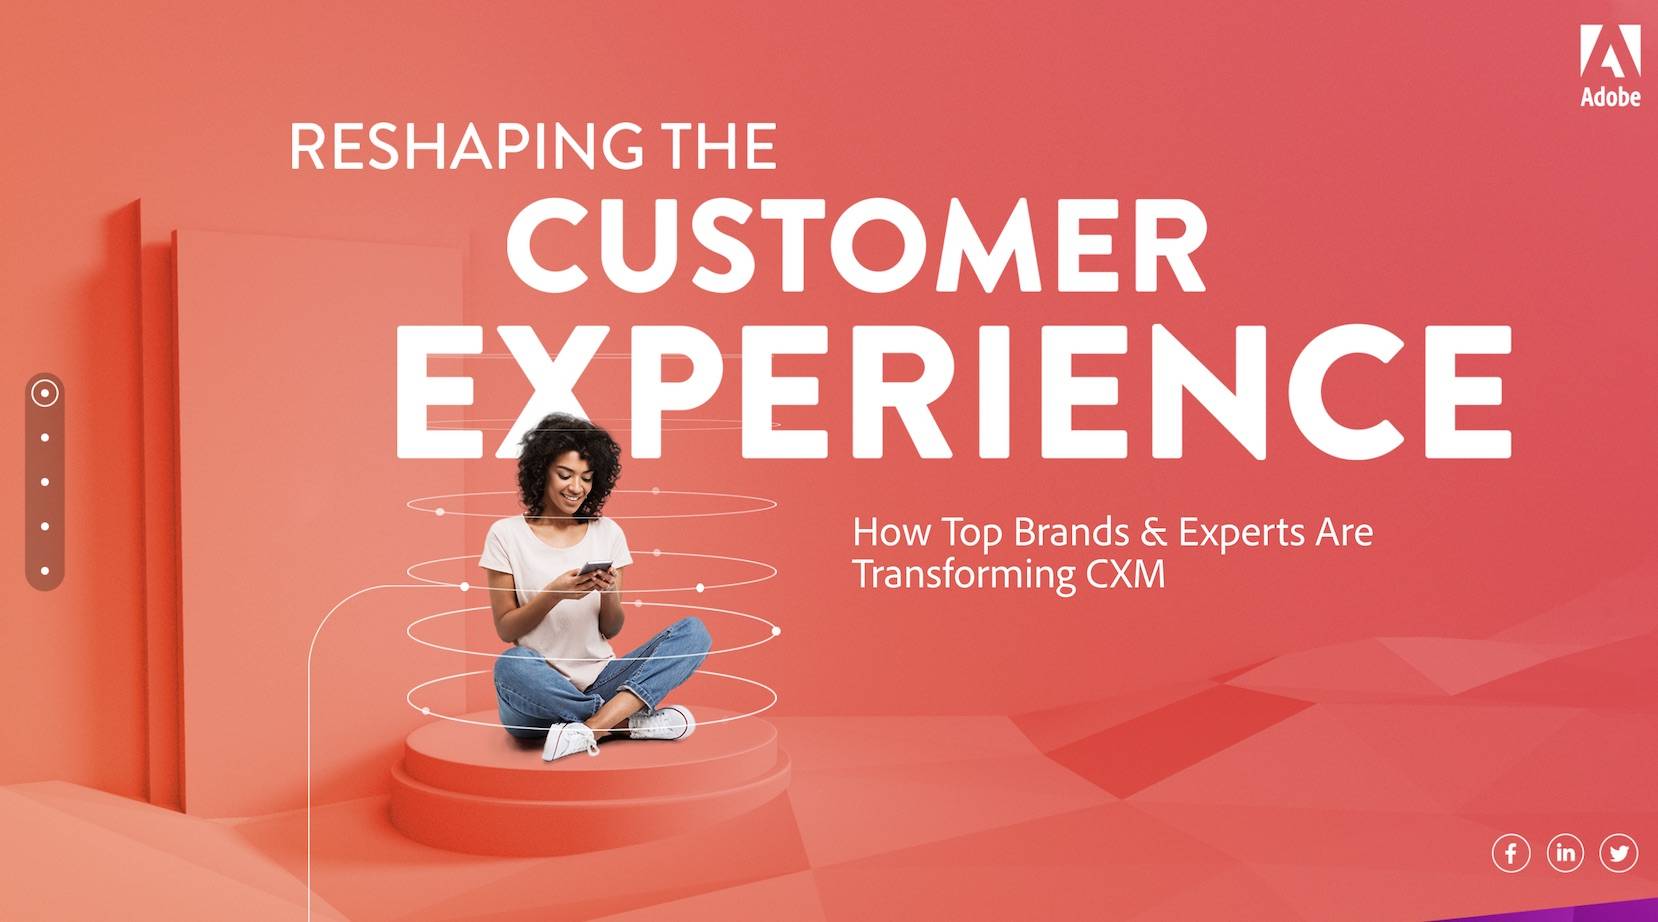 the Adobe CXM website homepage design for B2B audiences that effectively leads visitors through by telling a story